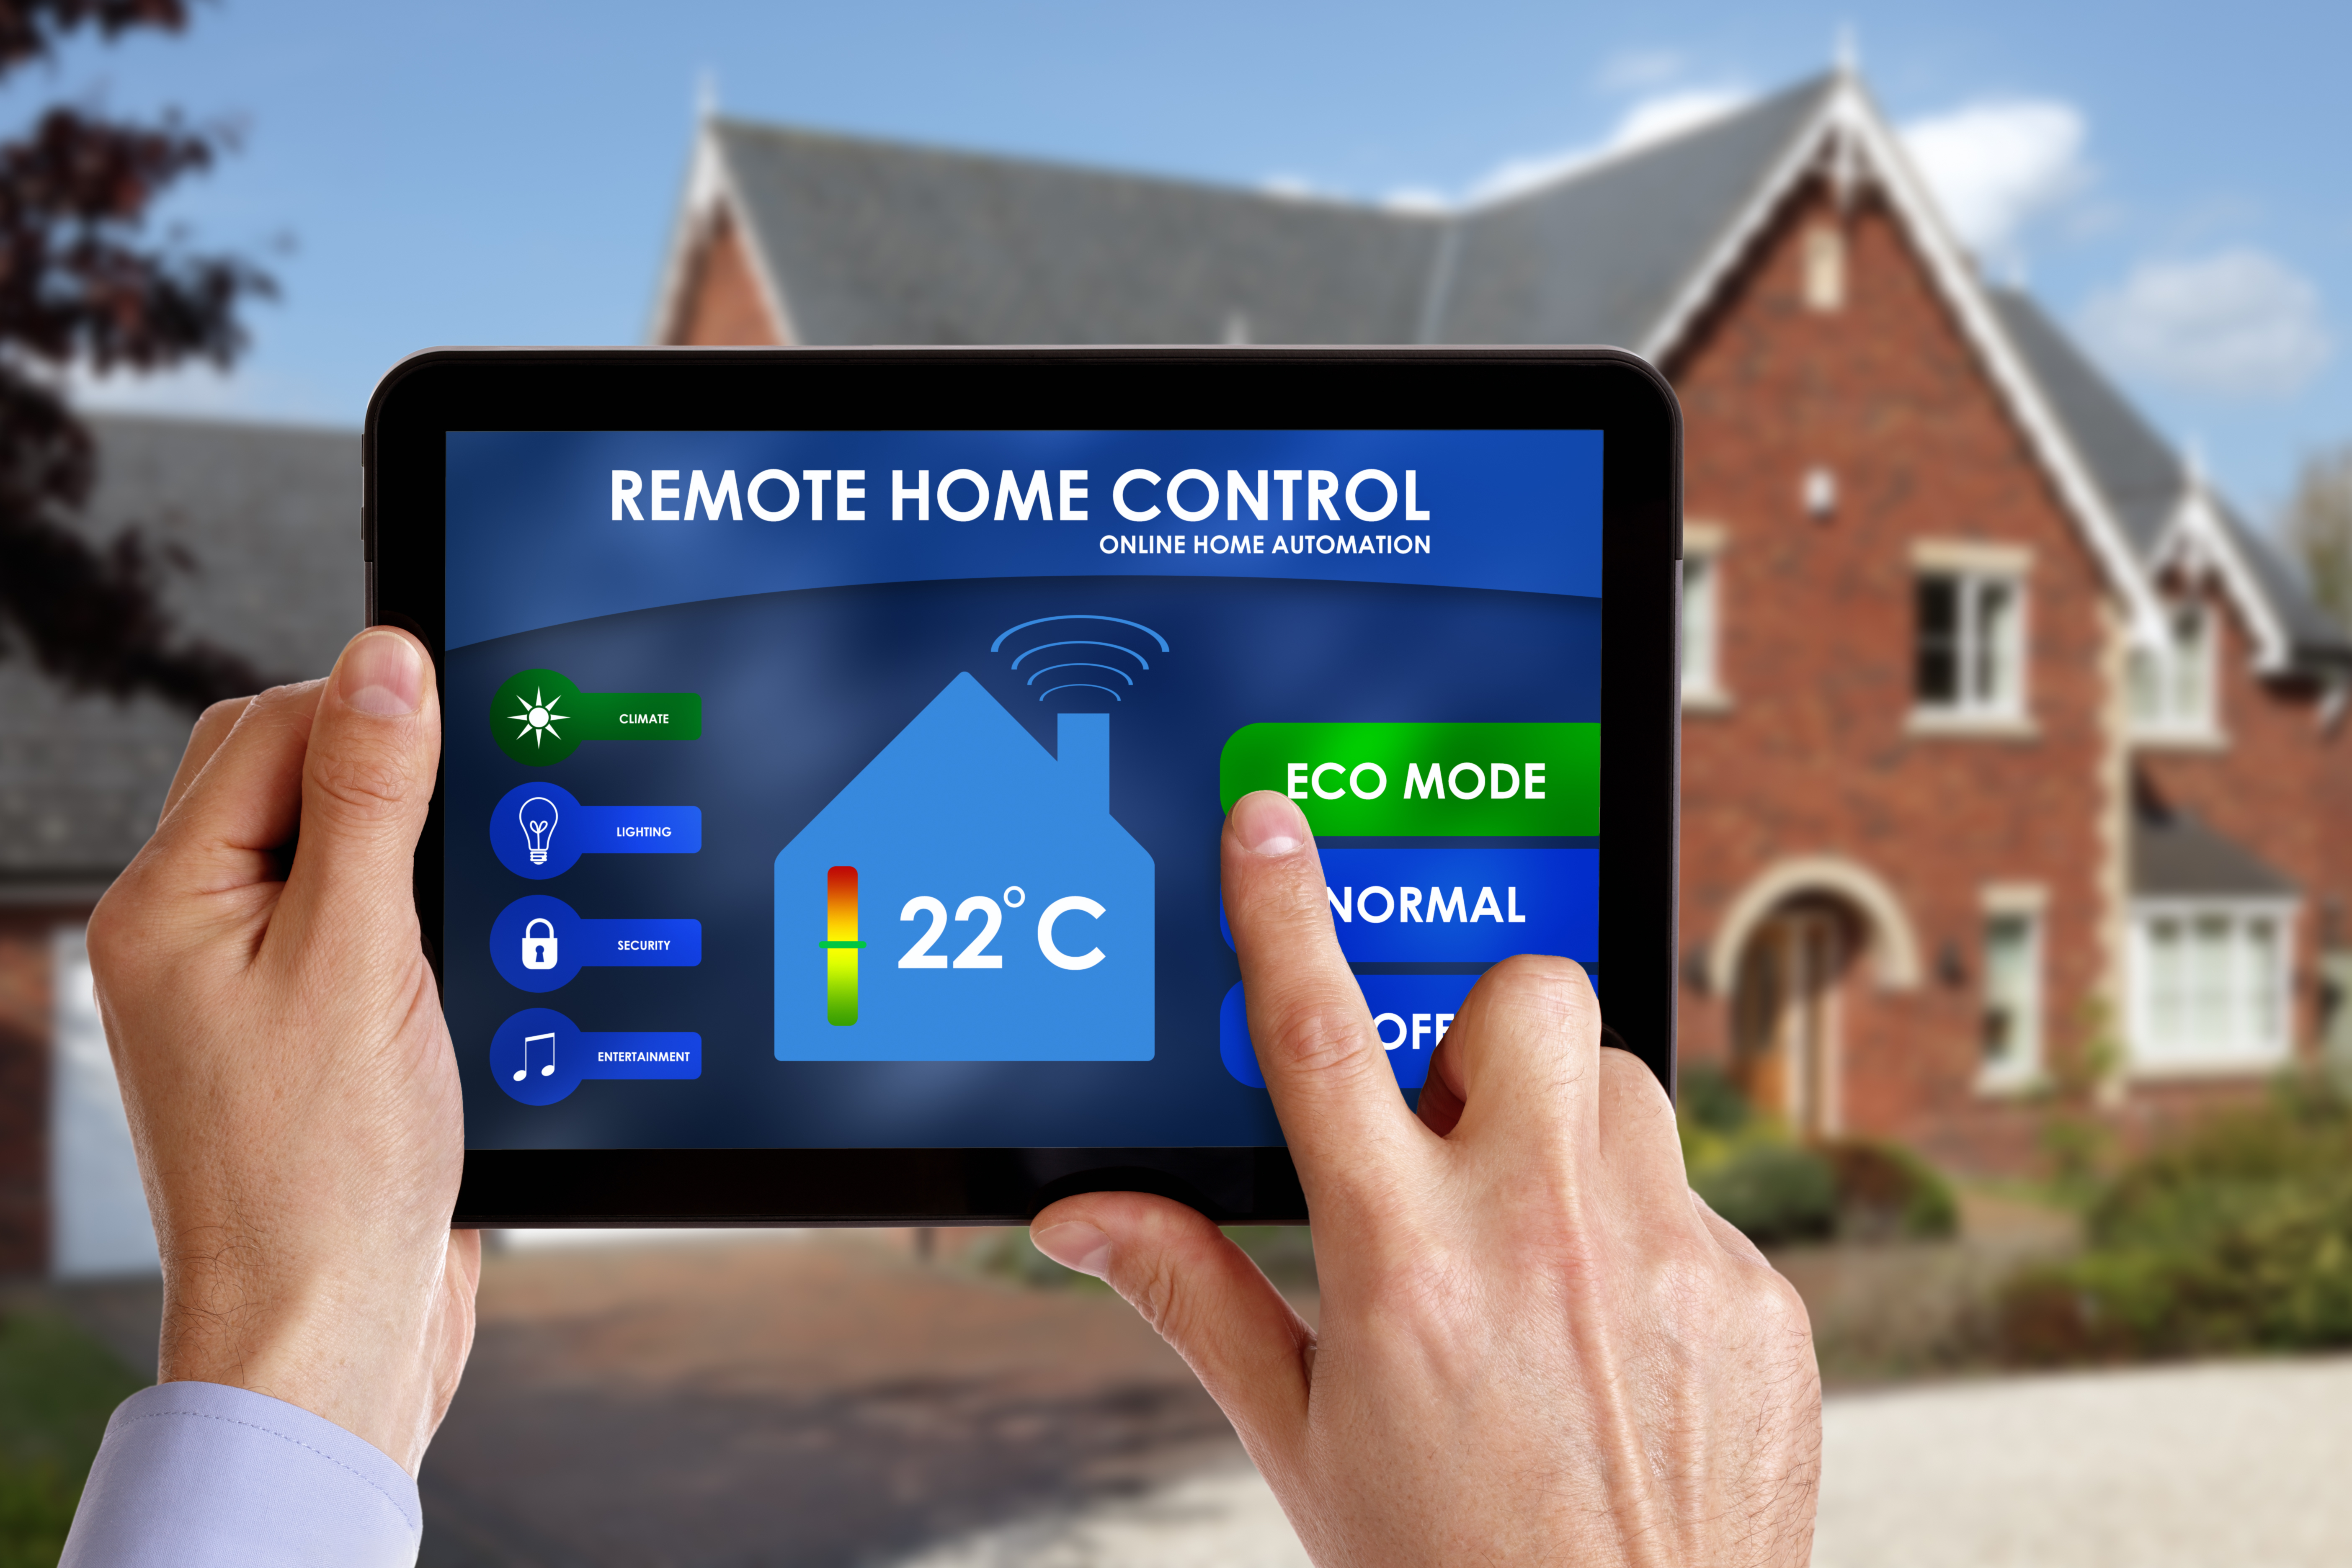 Remodelers can meet their client’s requests by incorporating emerging technologies to create a more energy-efficient home; however, there are a few things remodelers should consider before presenting clients with these new opportunities.